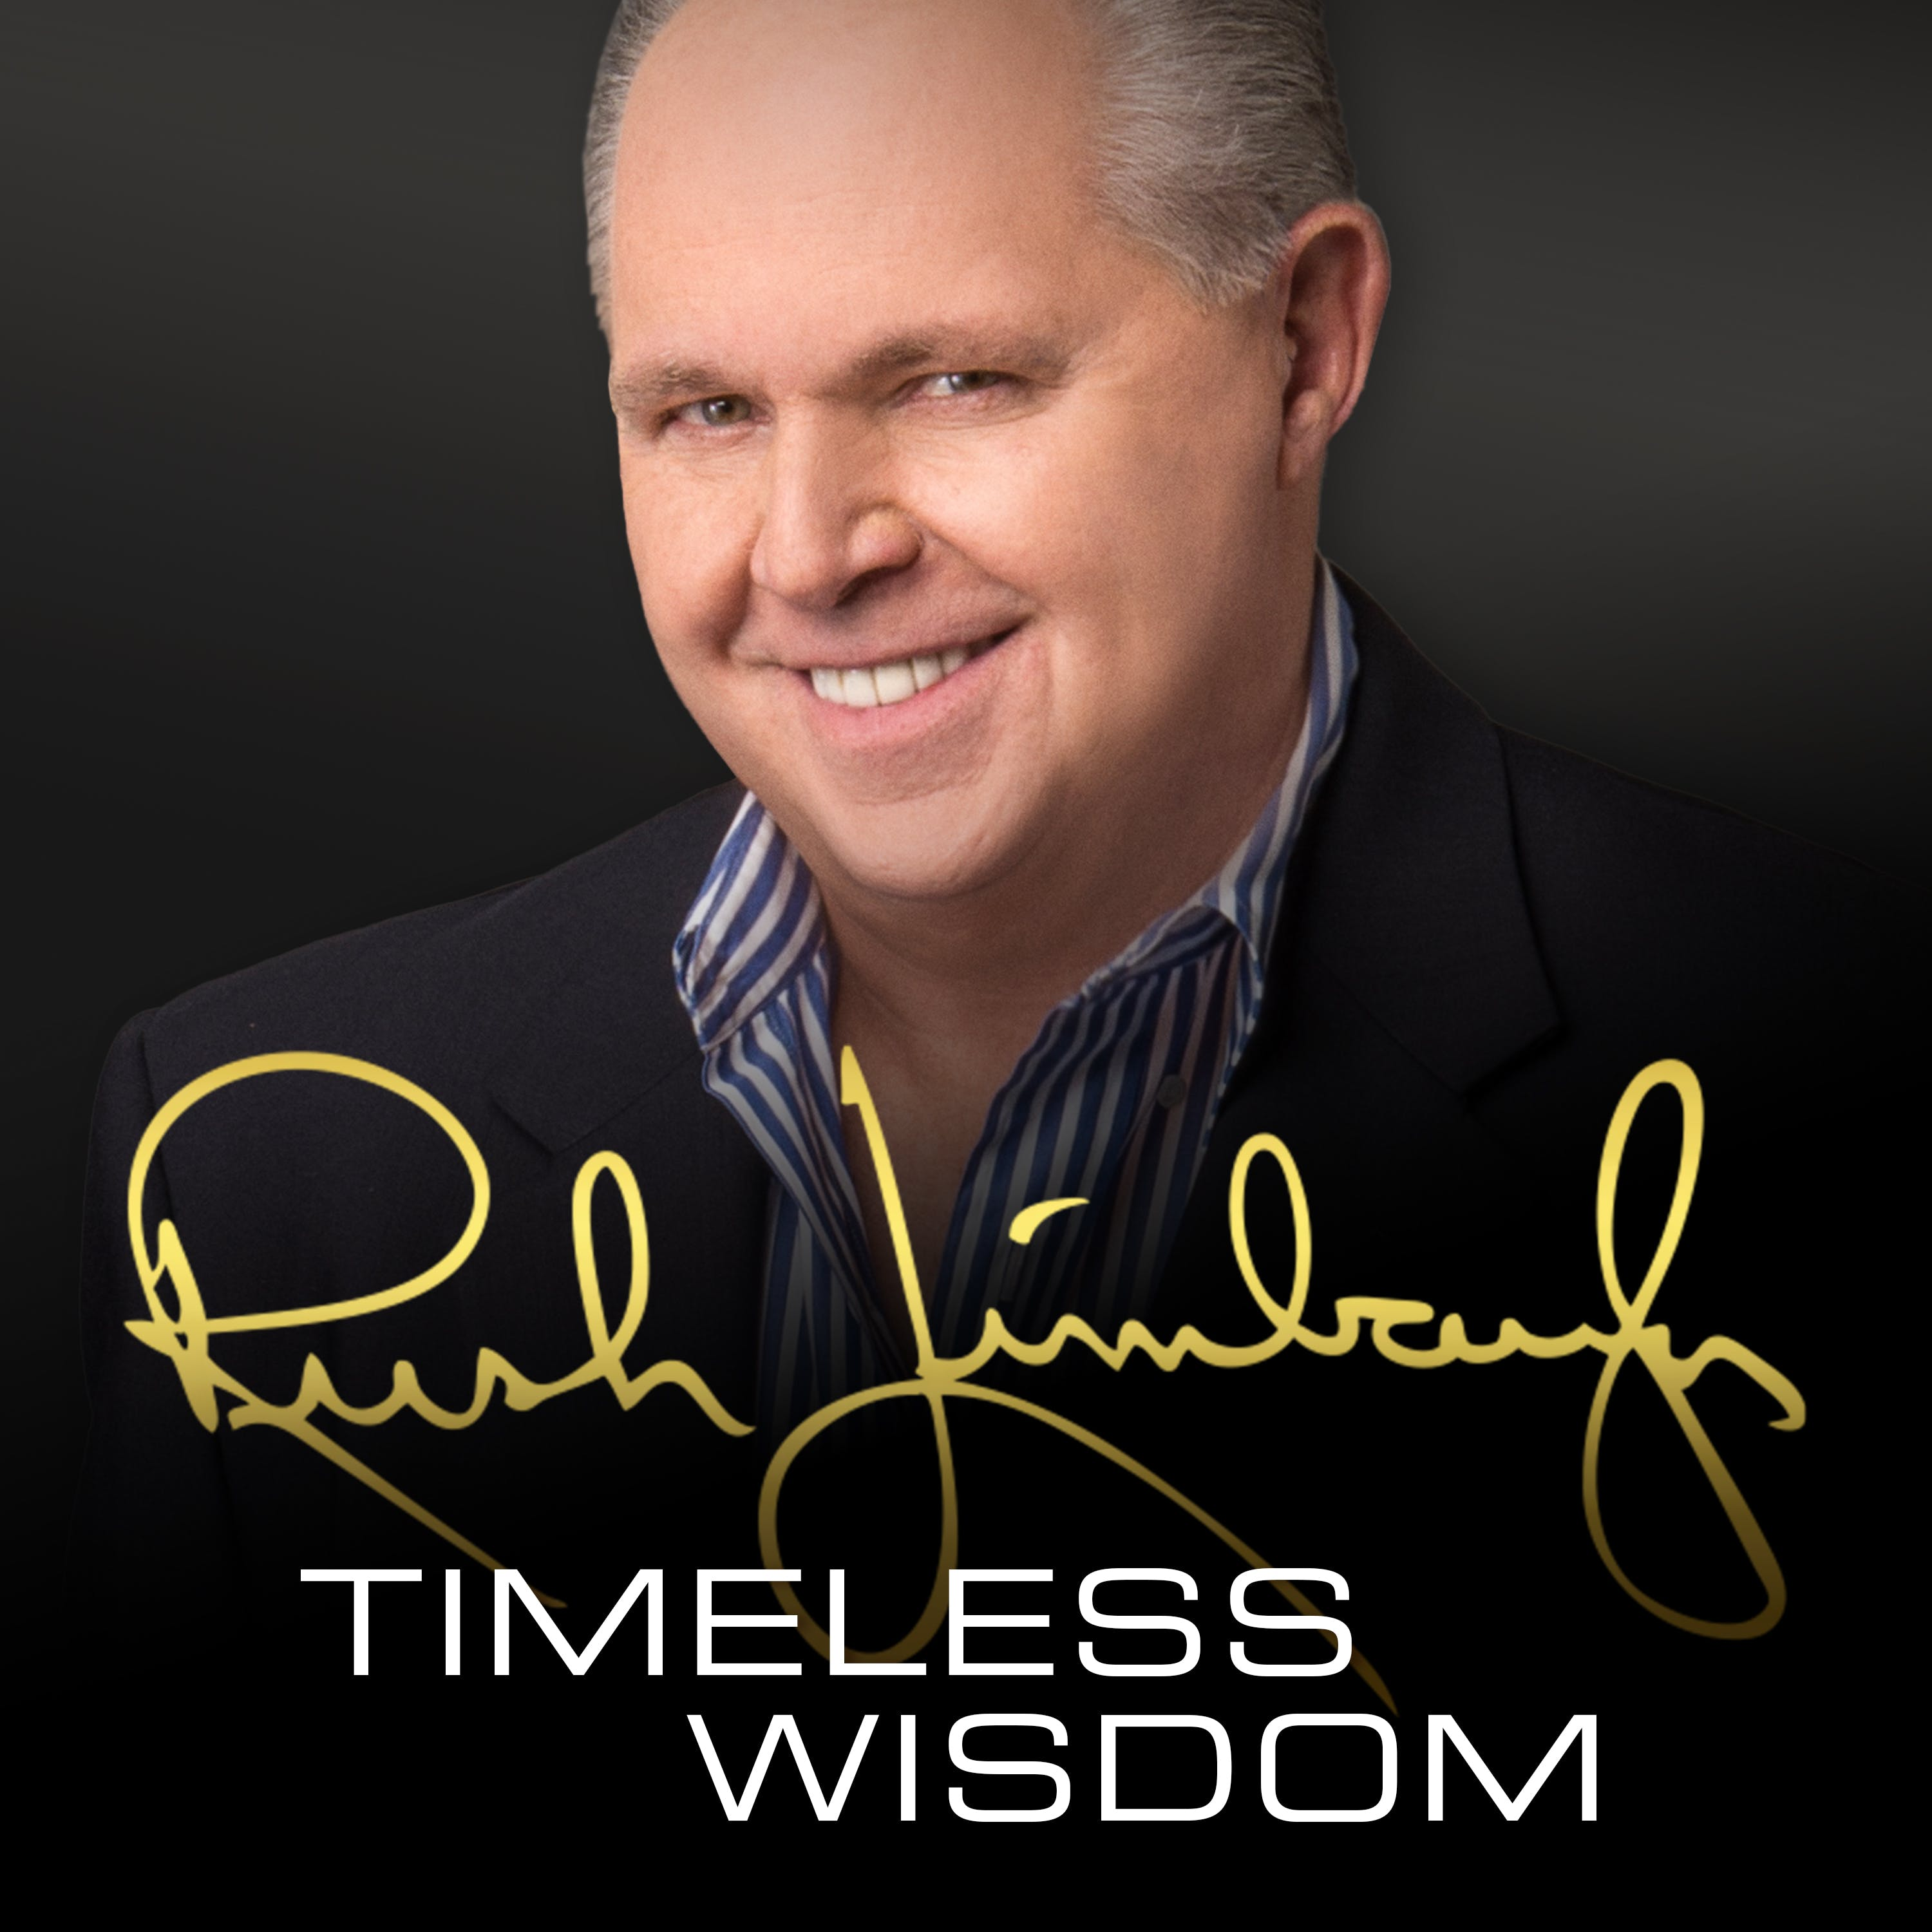 Rush's Timeless Wisdom - Remember the All-American First Calvary Amazon Battalion